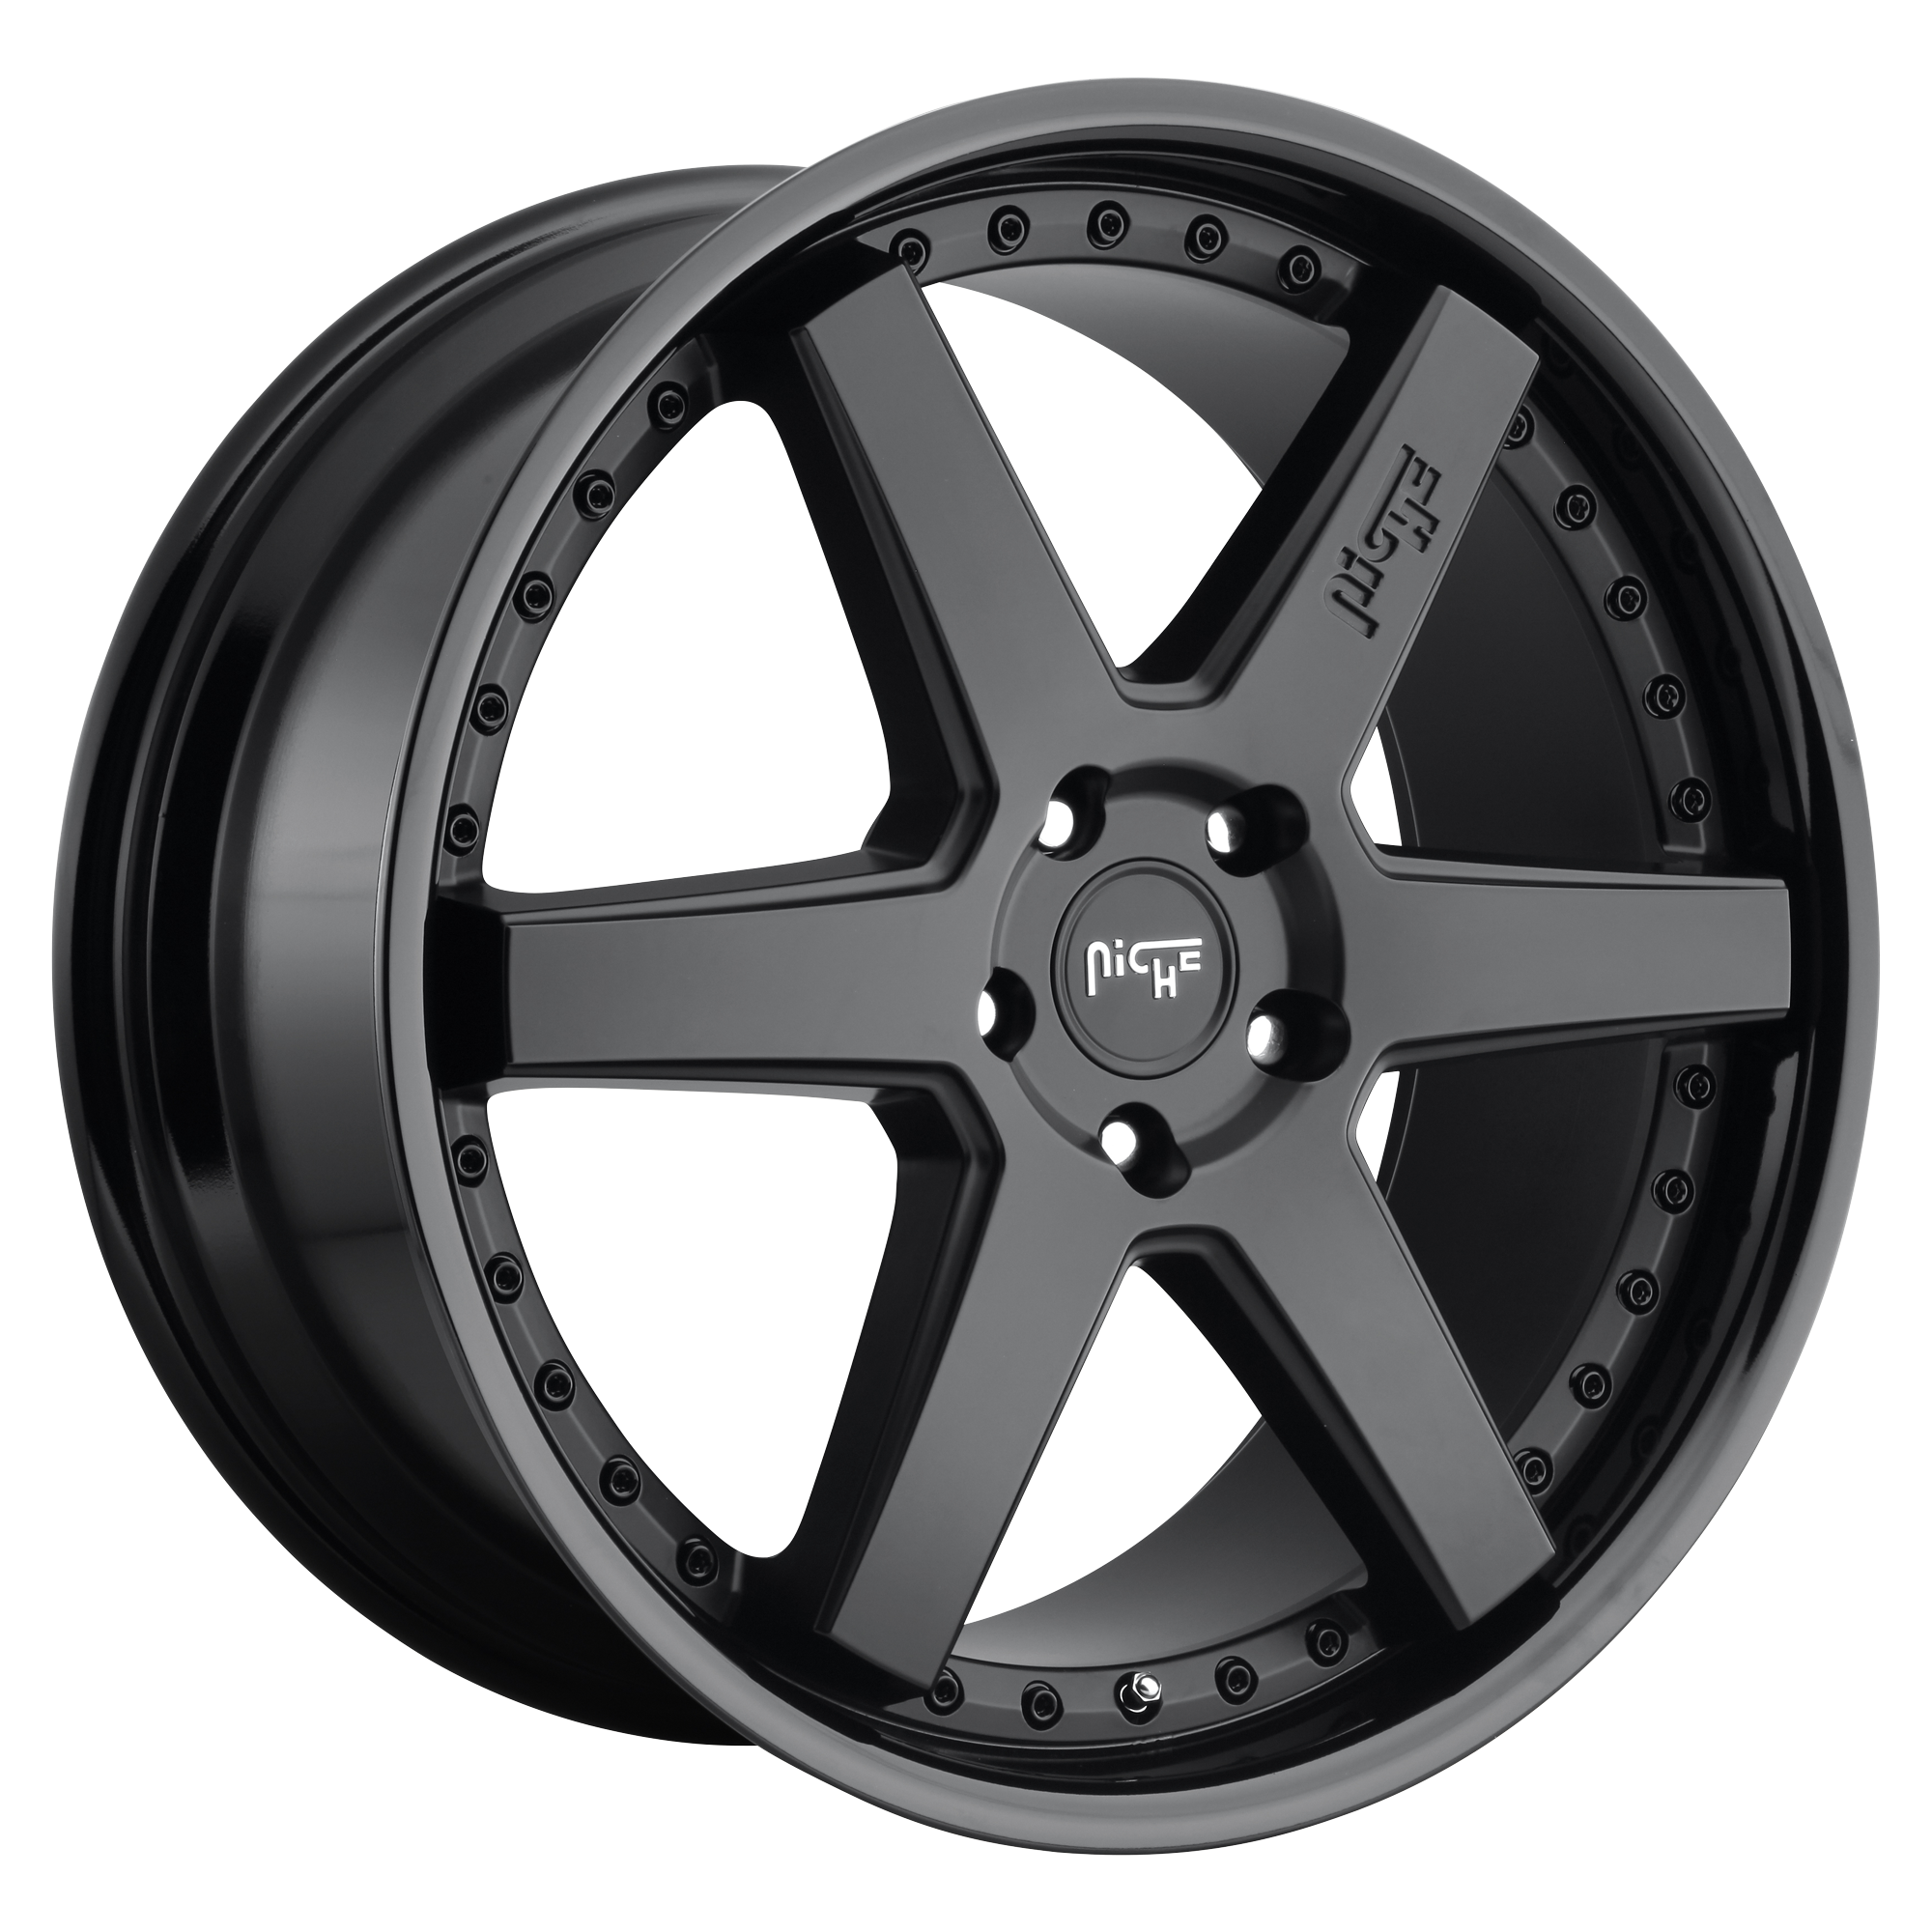 ALTAIR 22x10 6x135.00 GLOSS BLACK MATTE BLACK (30 mm) - Tires and Engine Performance